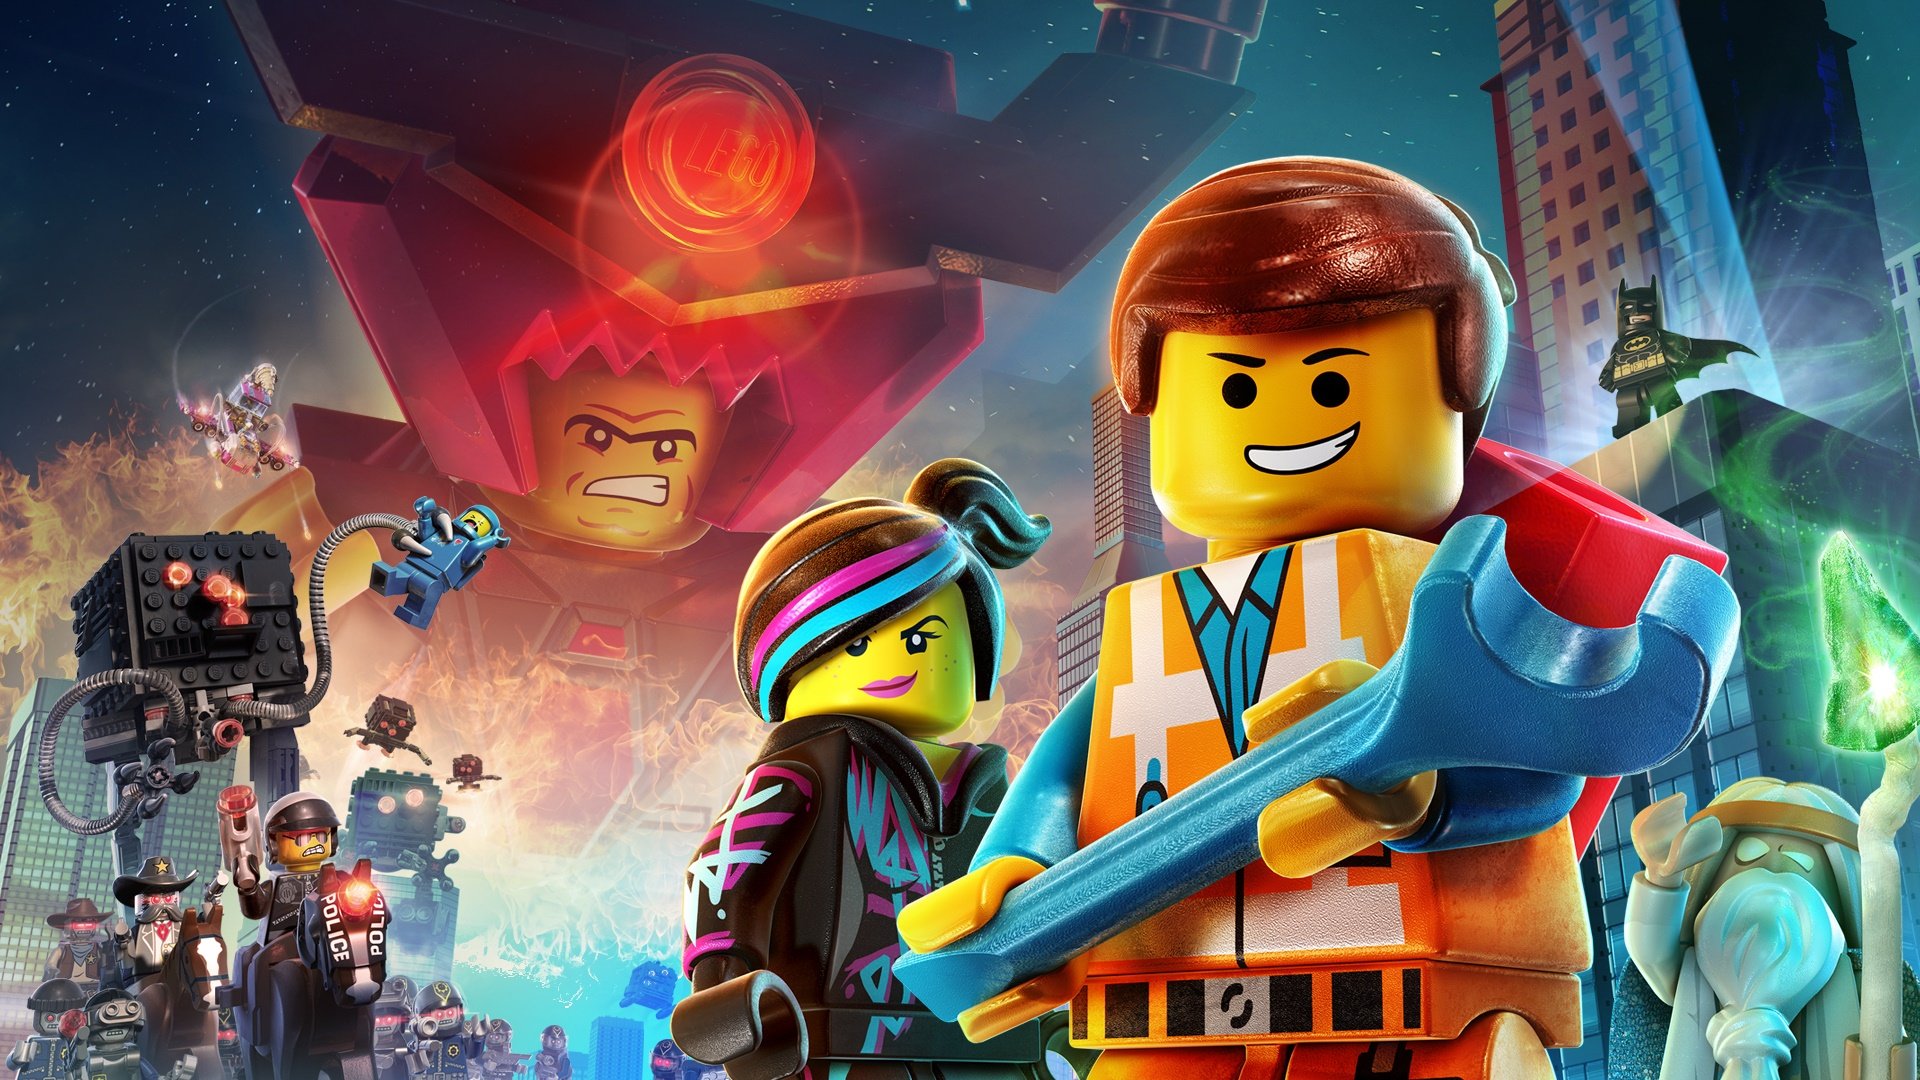 The Lego Movie 2014 Movie Wallpapers HD Wallpapers